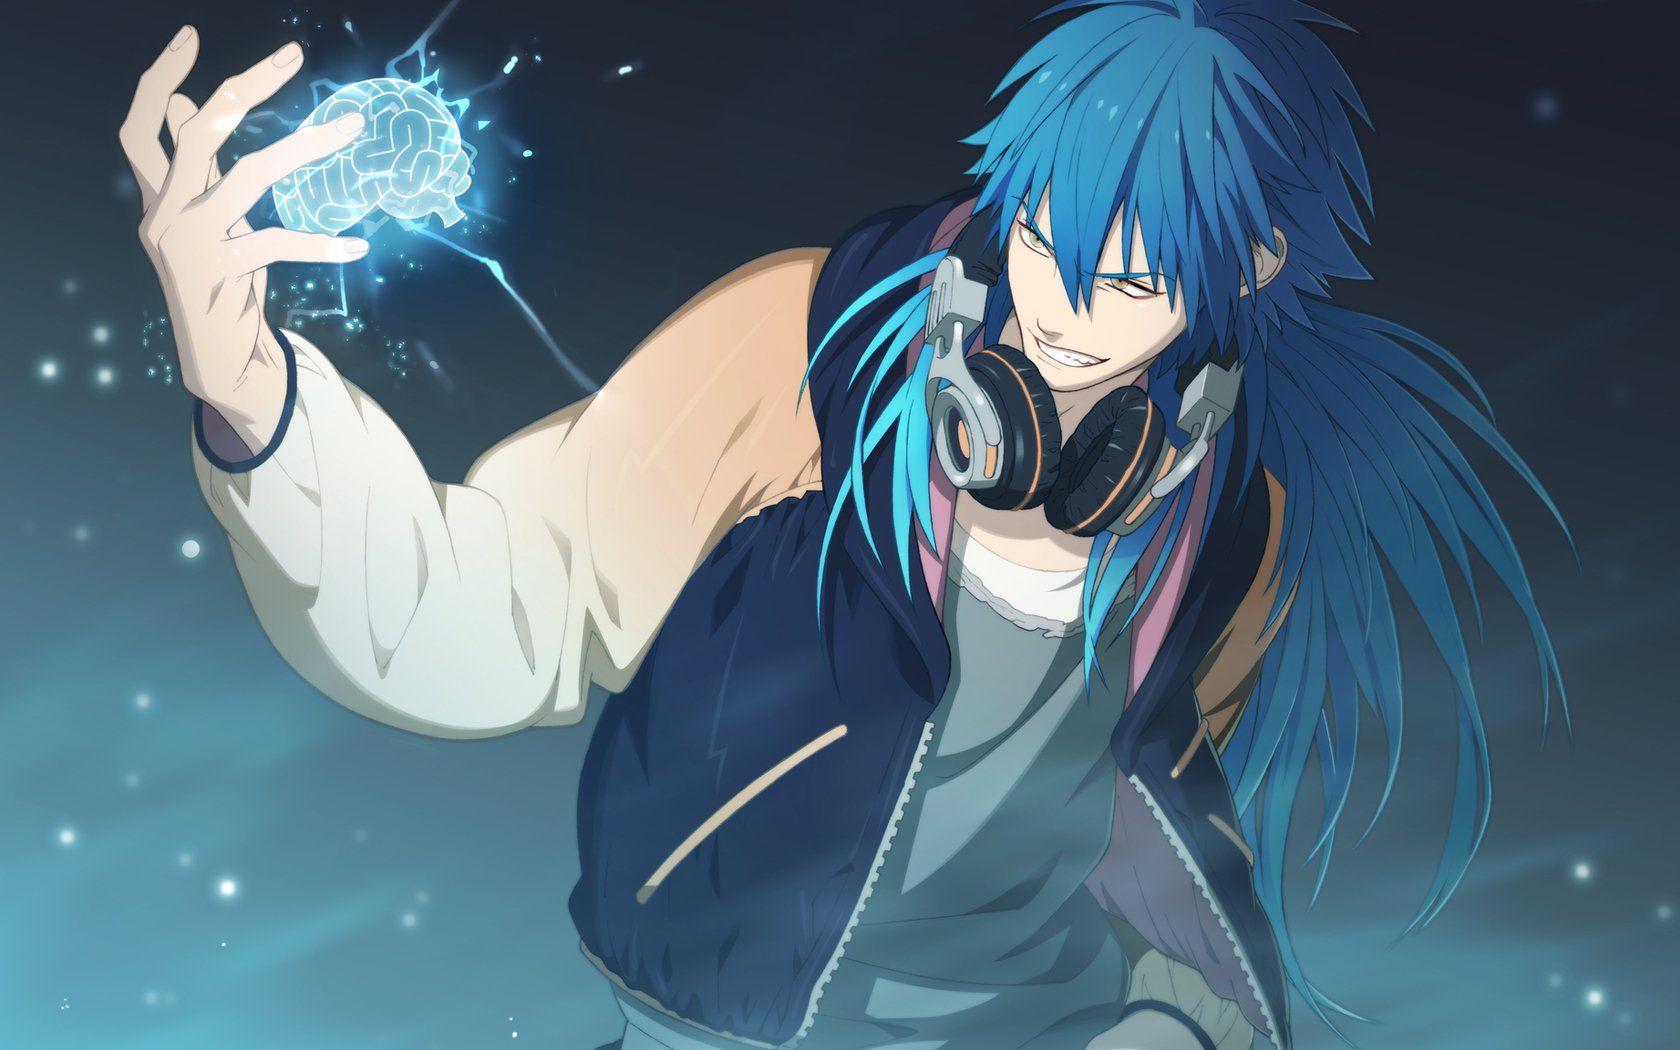 Blue Haired Anime Boy Wallpaper. Cool anime wallpaper, Anime wallpaper download, Cute anime boy